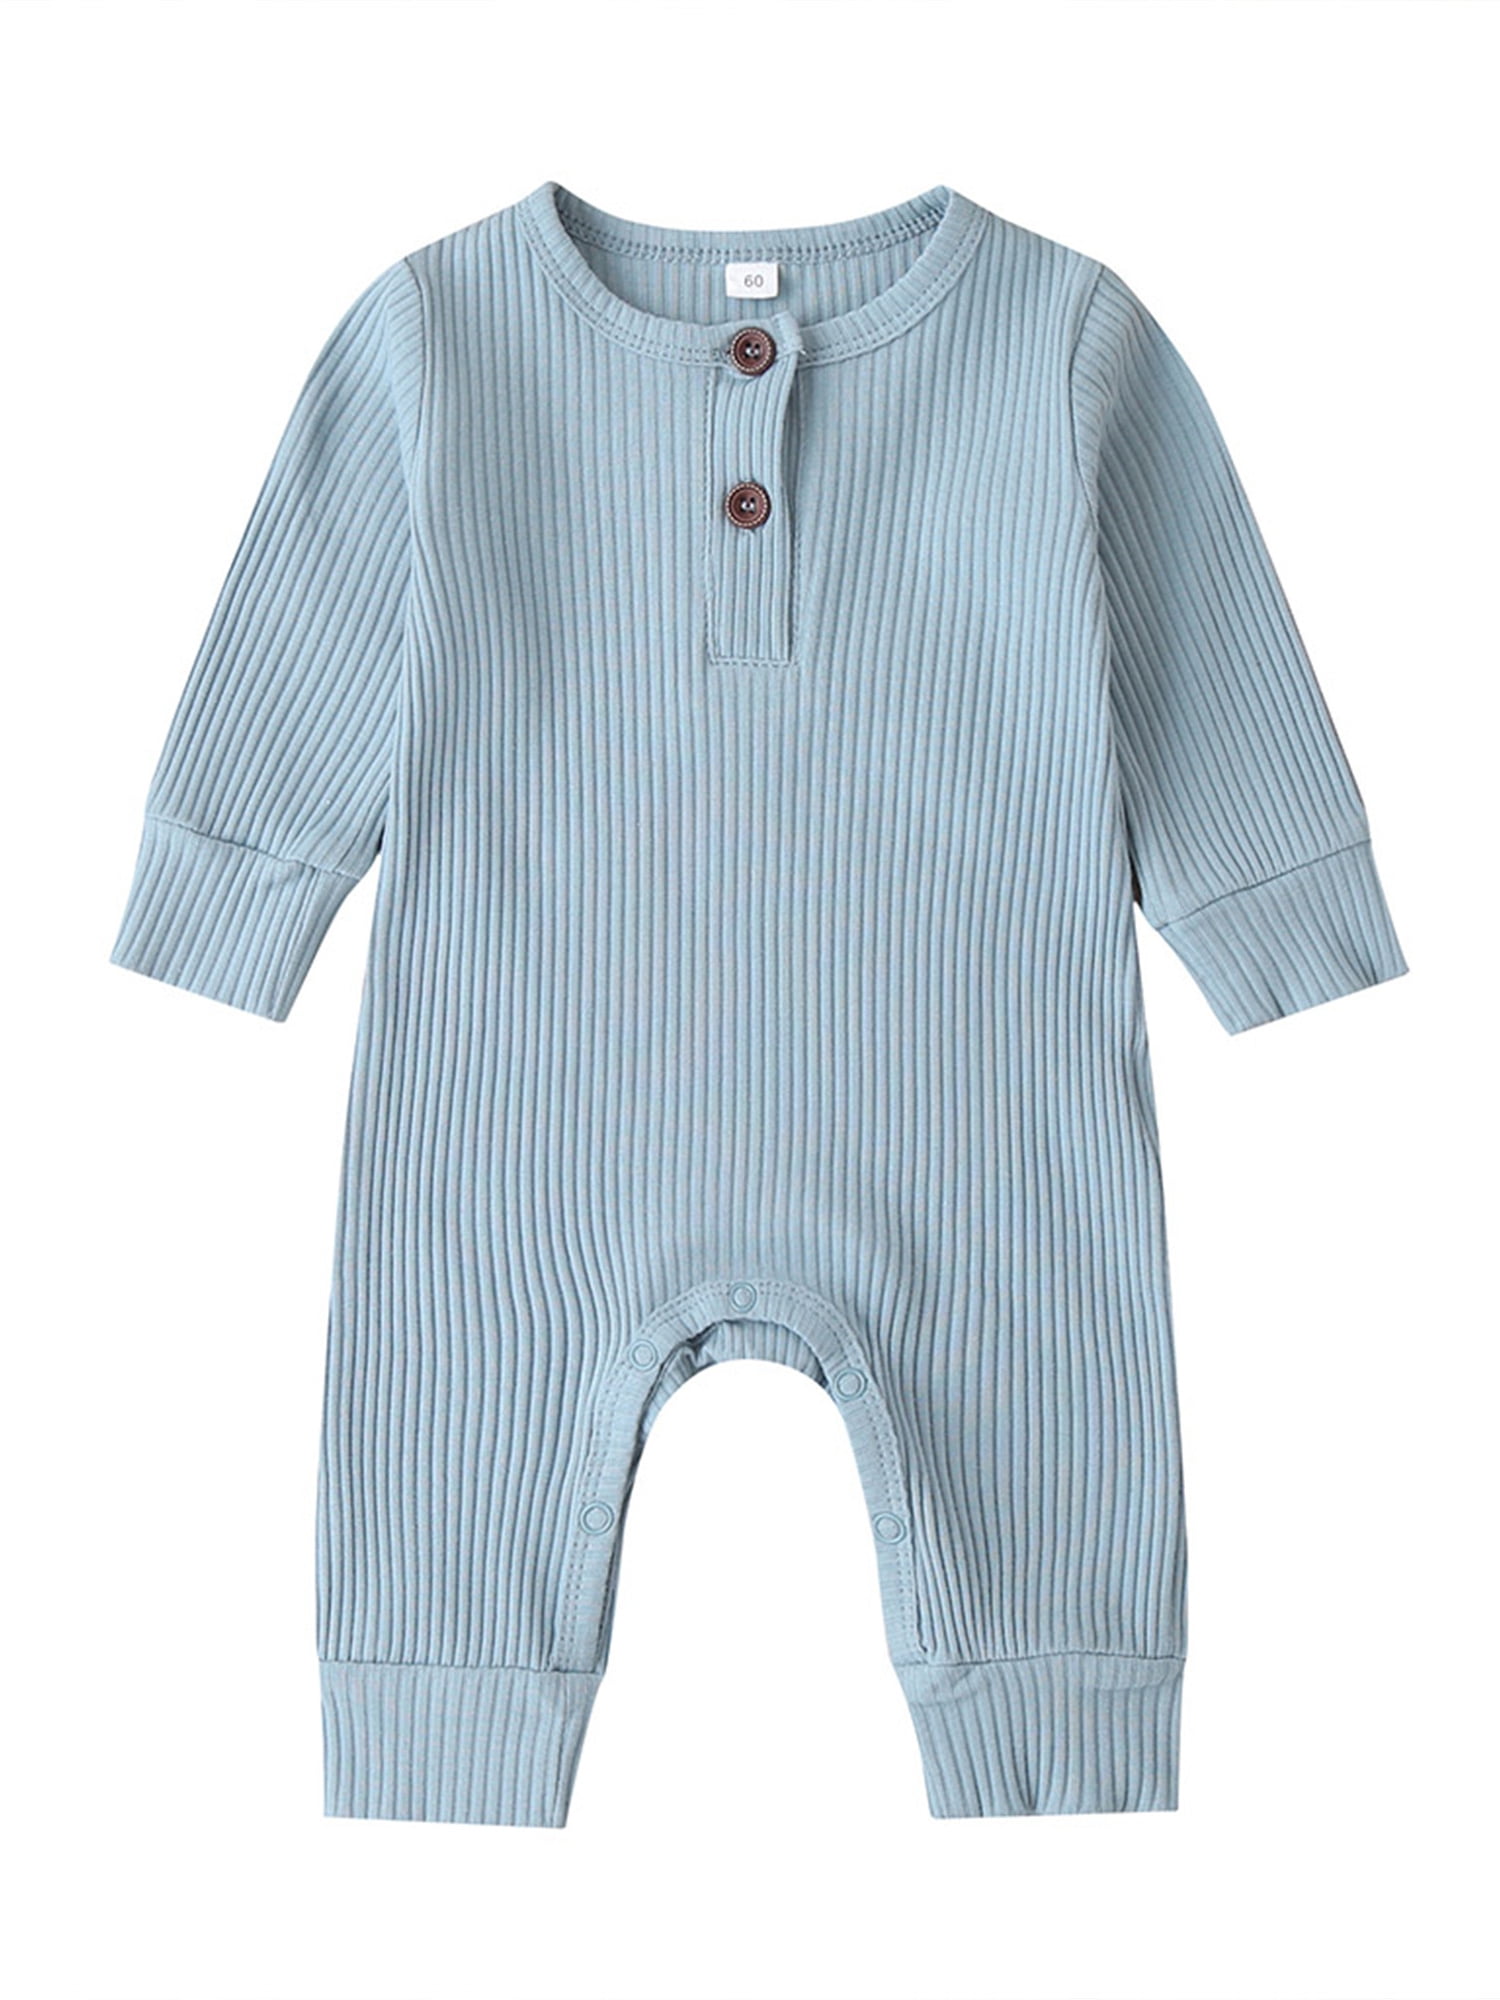 Newborn Baby Boys Girls Long Sleeve Knitted Romper Jumpsuit One-Pieces Clothes 